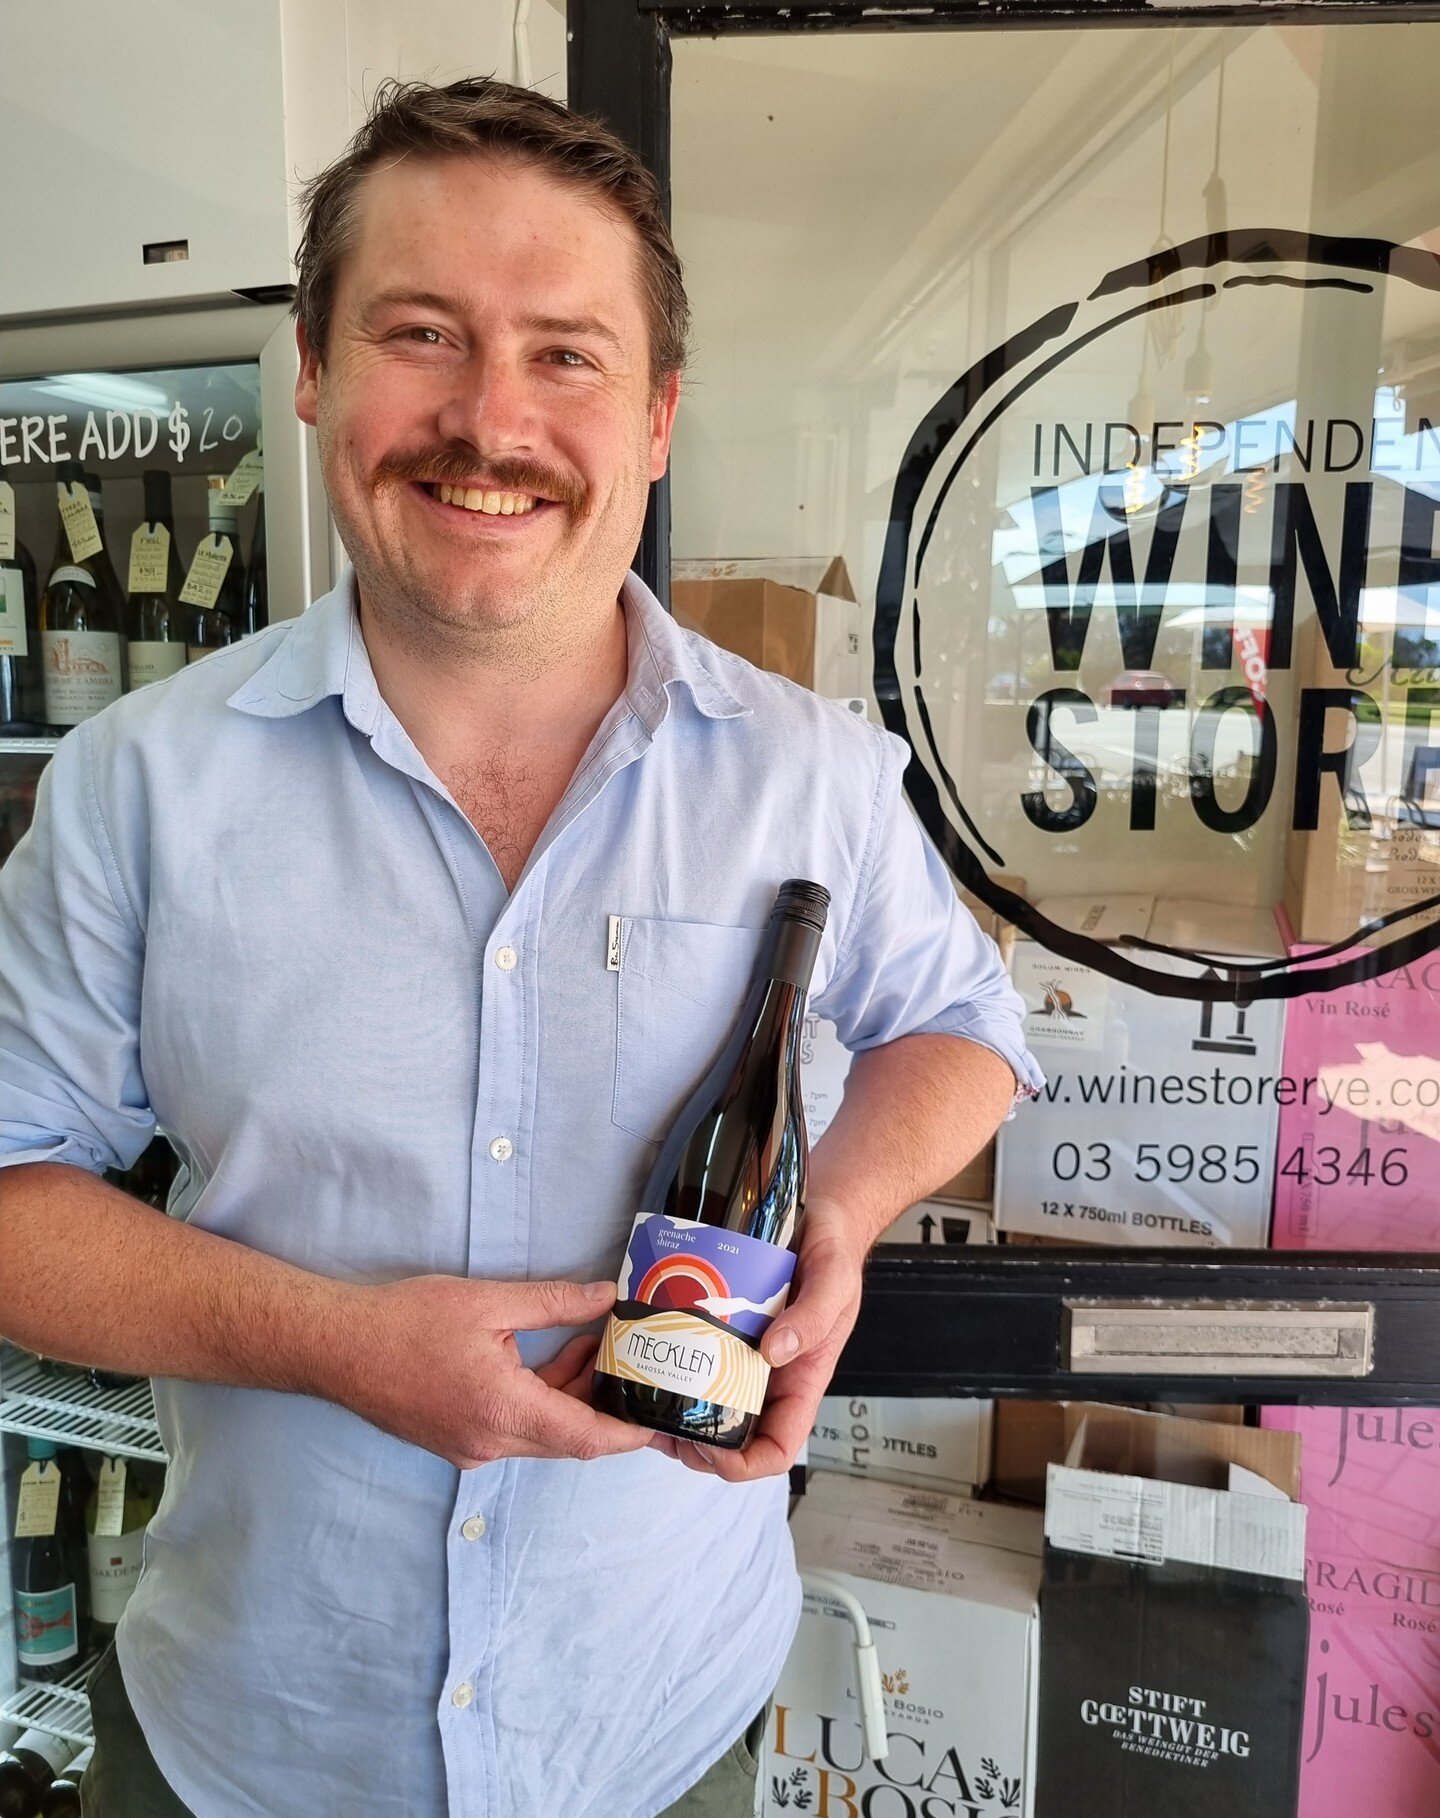 Our 2021 Grenache Shiraz is now available at the Independent Wine Store in Rye, Morning Peninsula. We always enjoy connecting with others through a common passion of wine, with the Independent Wine Store having a fantastic selection of local and inte